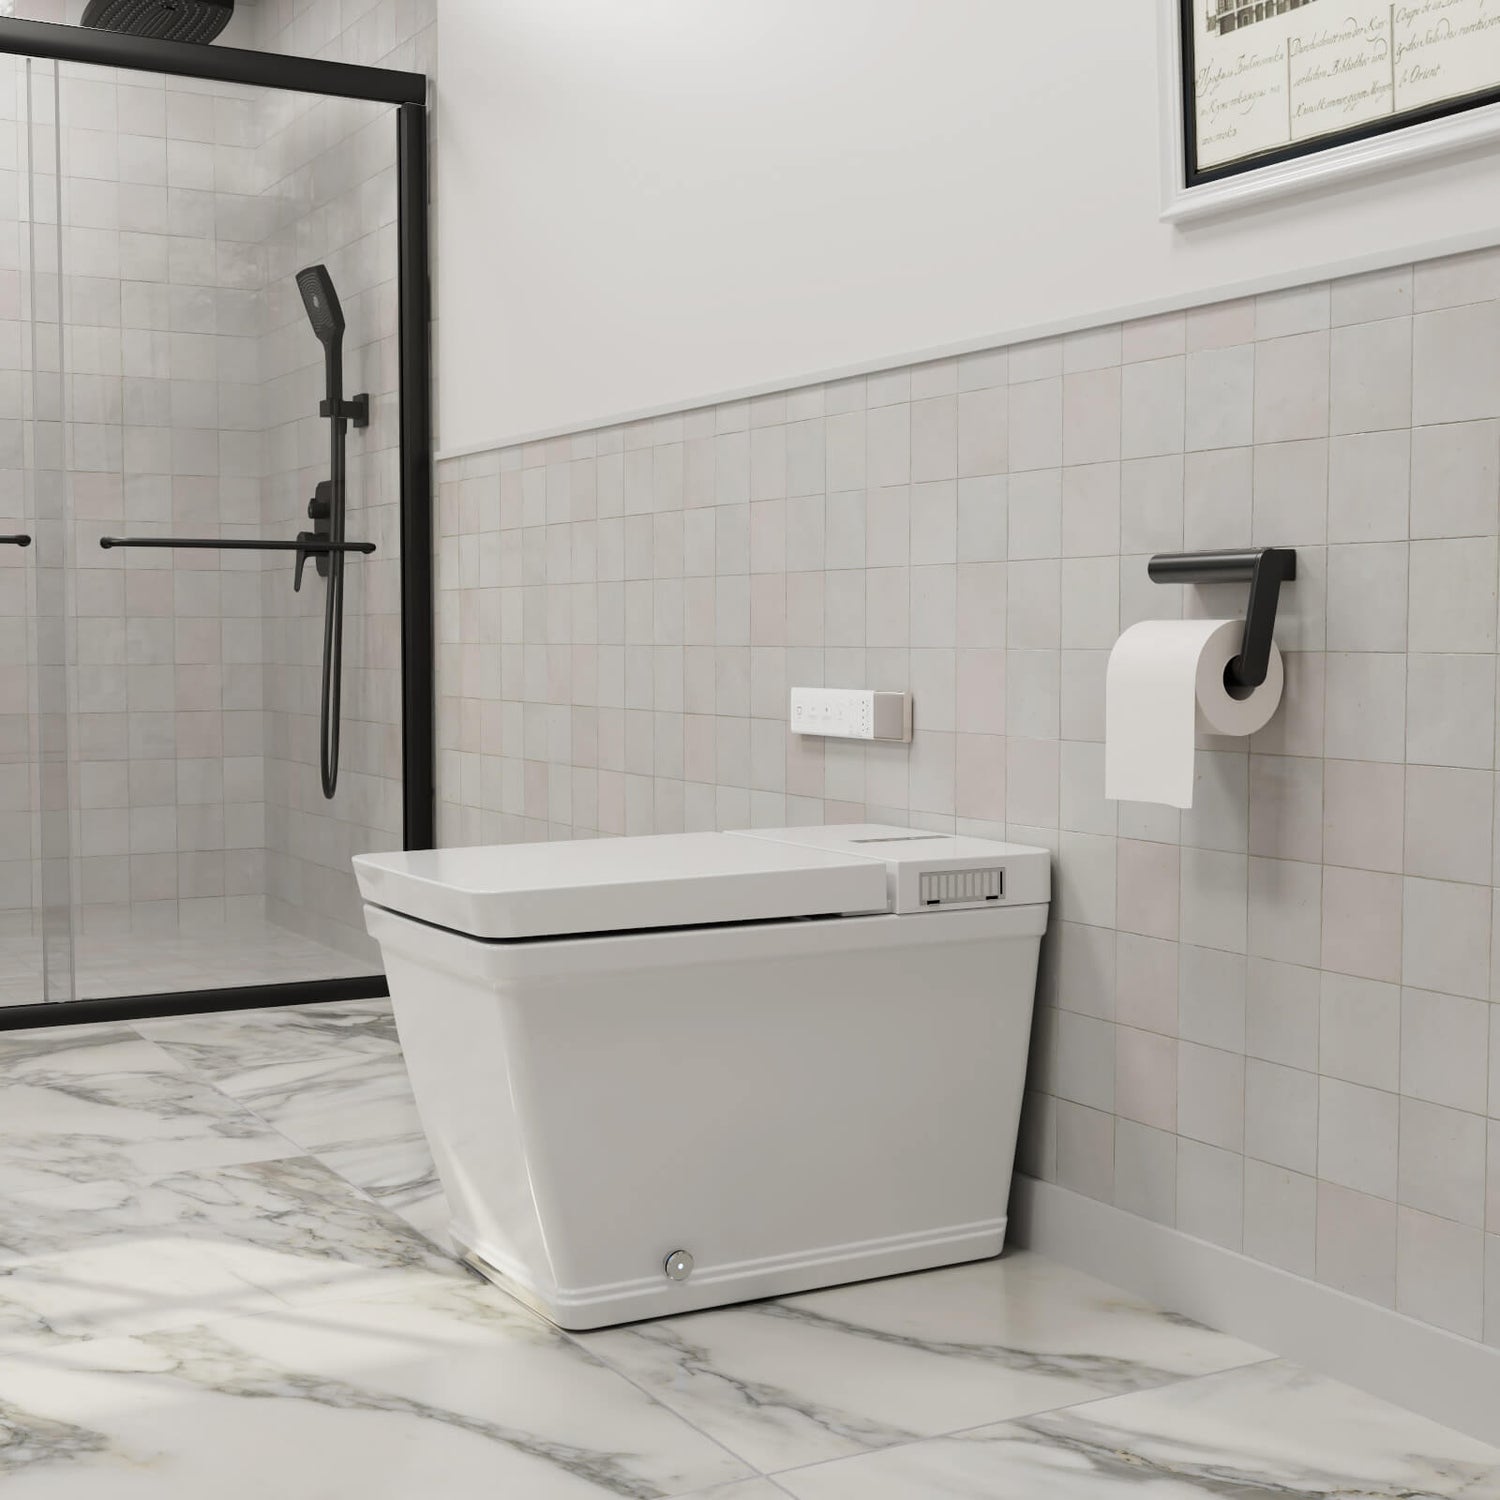 Square Smart Bidet Toilet with Remote Control, One Piece Tankless, Heated Seat, Warm Water and Dry